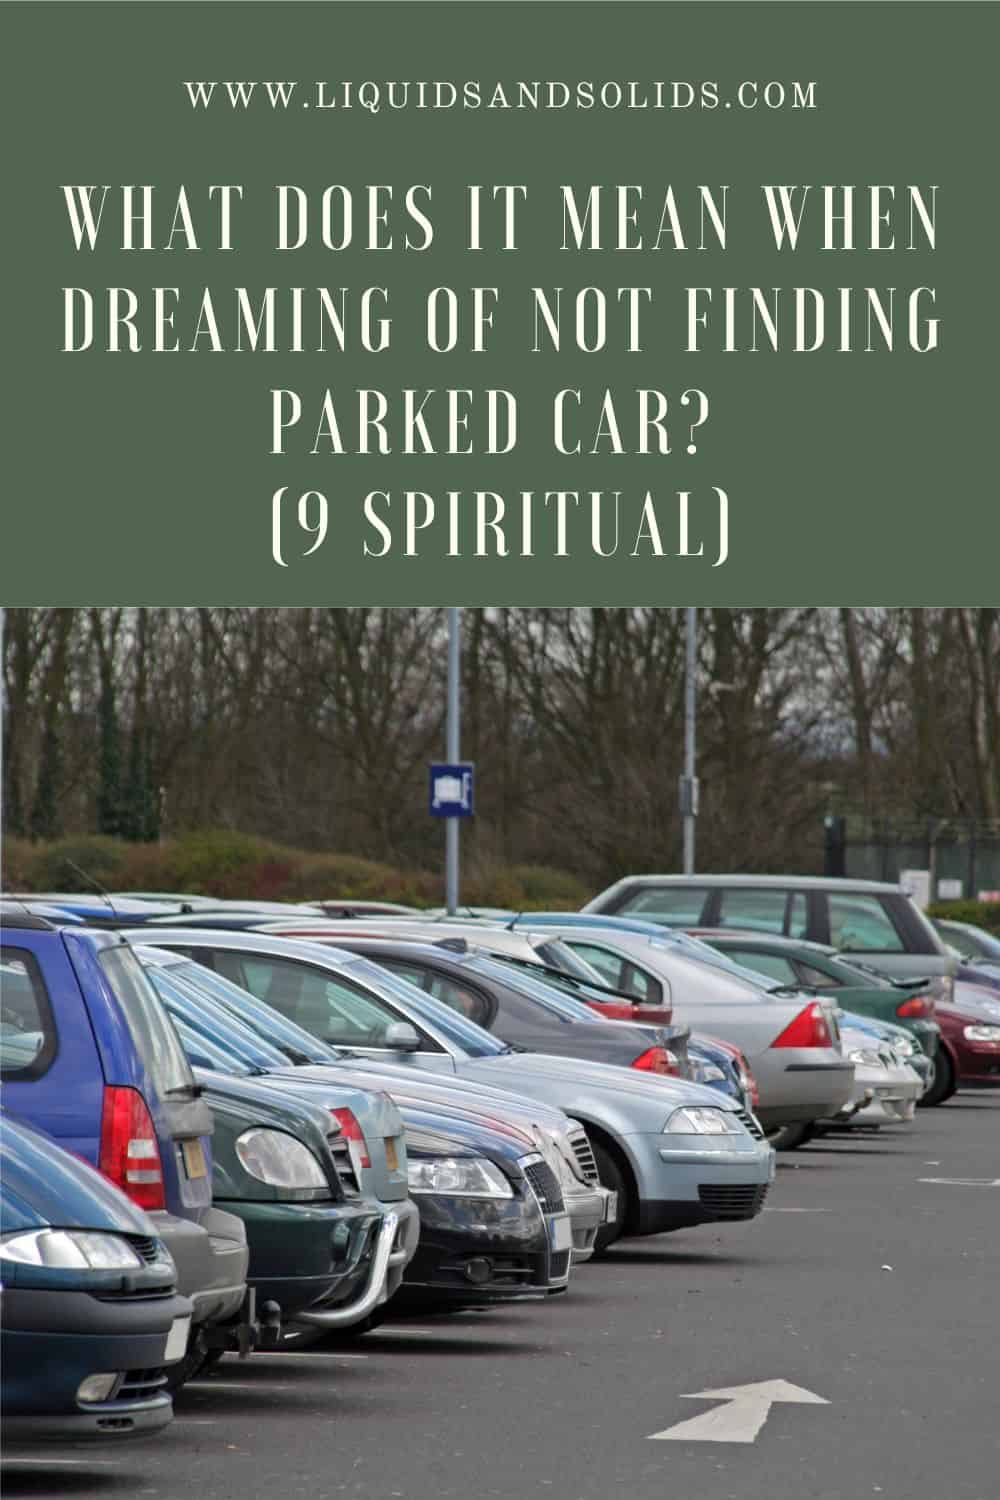 What Does It Mean When Dreaming of Not Finding Parked Car?